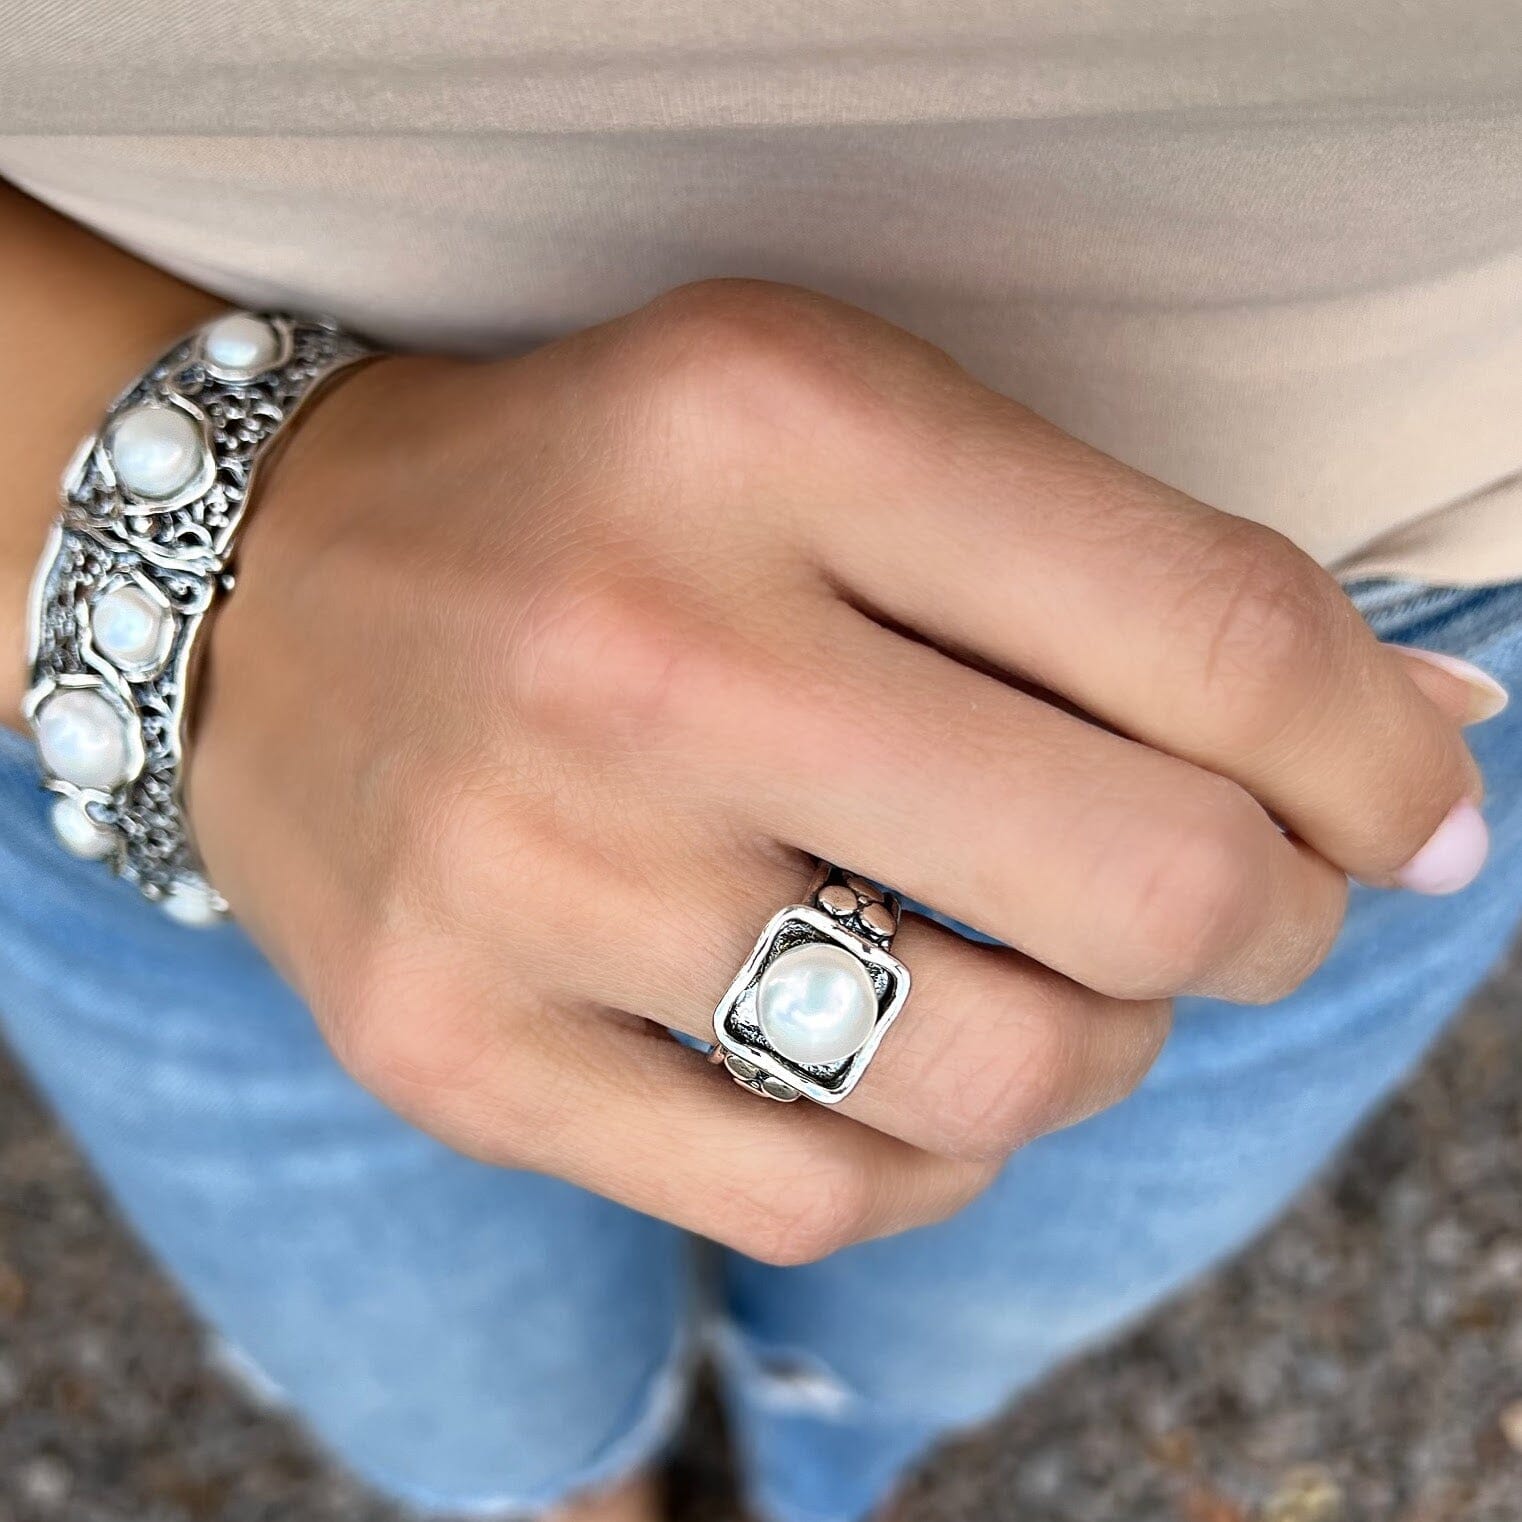 Pearladise Ring paired with Fabulous Bracelet